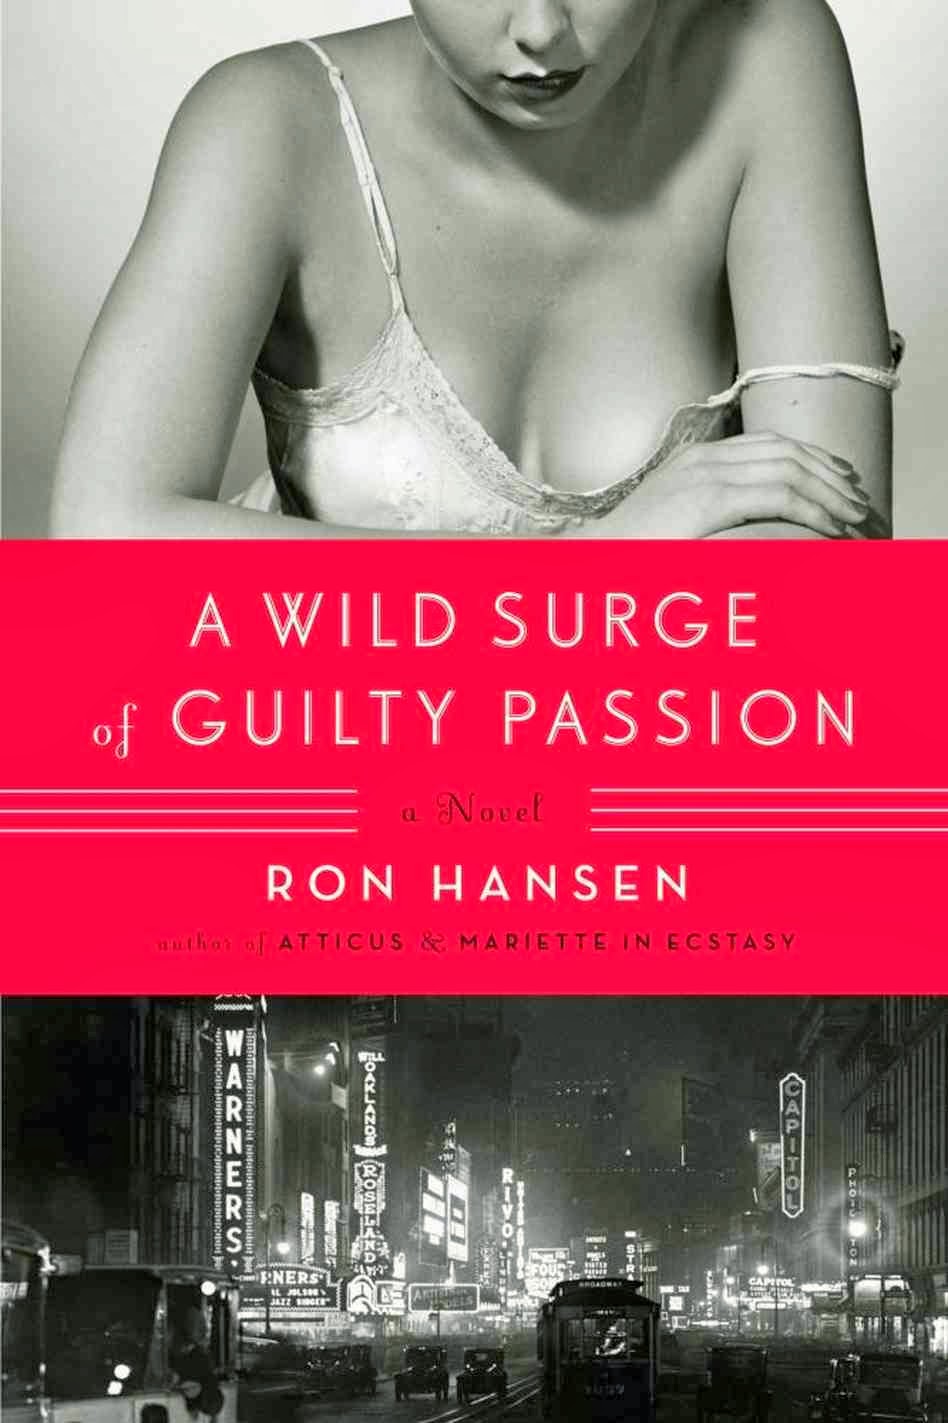 http://discover.halifaxpubliclibraries.ca/?q=title:%22wild%20surge%20of%20guilty%20passion%22%22